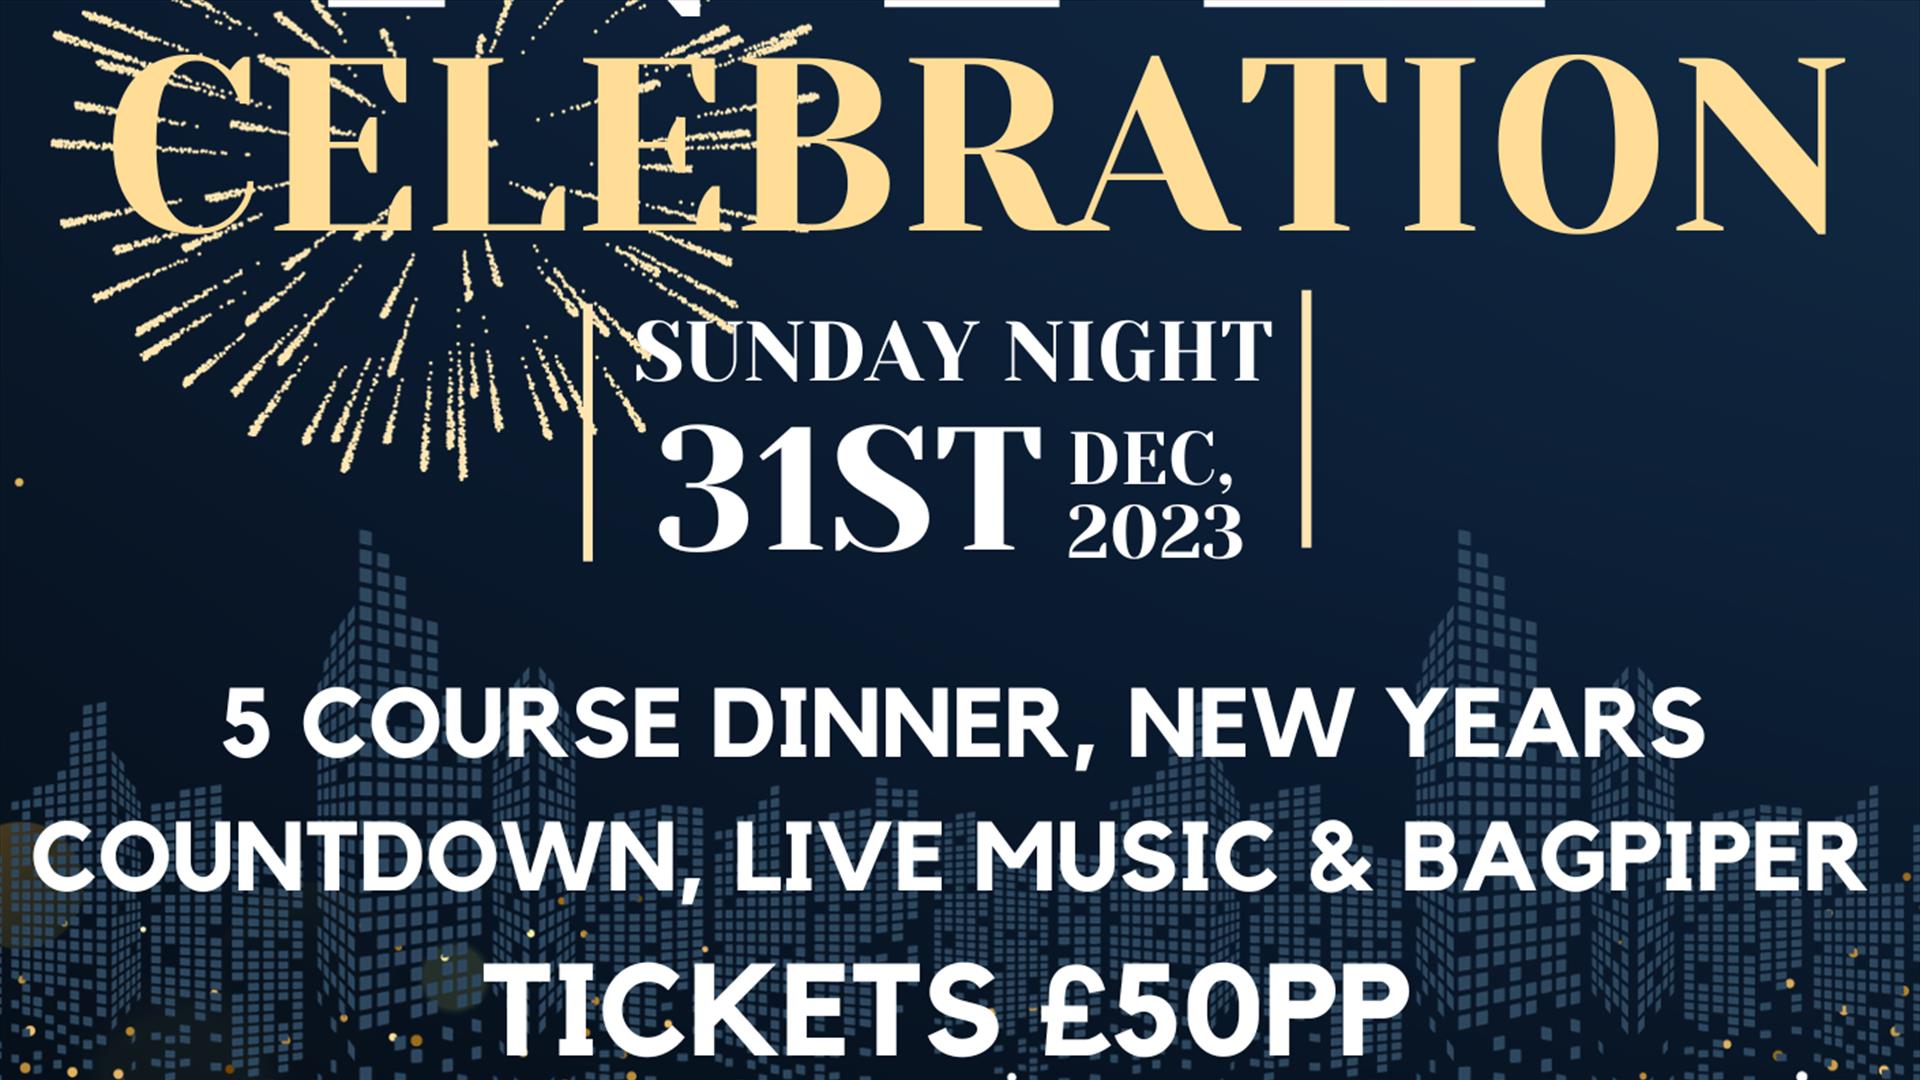 New Years Eve poster for Harbour House, Newcastle County Down